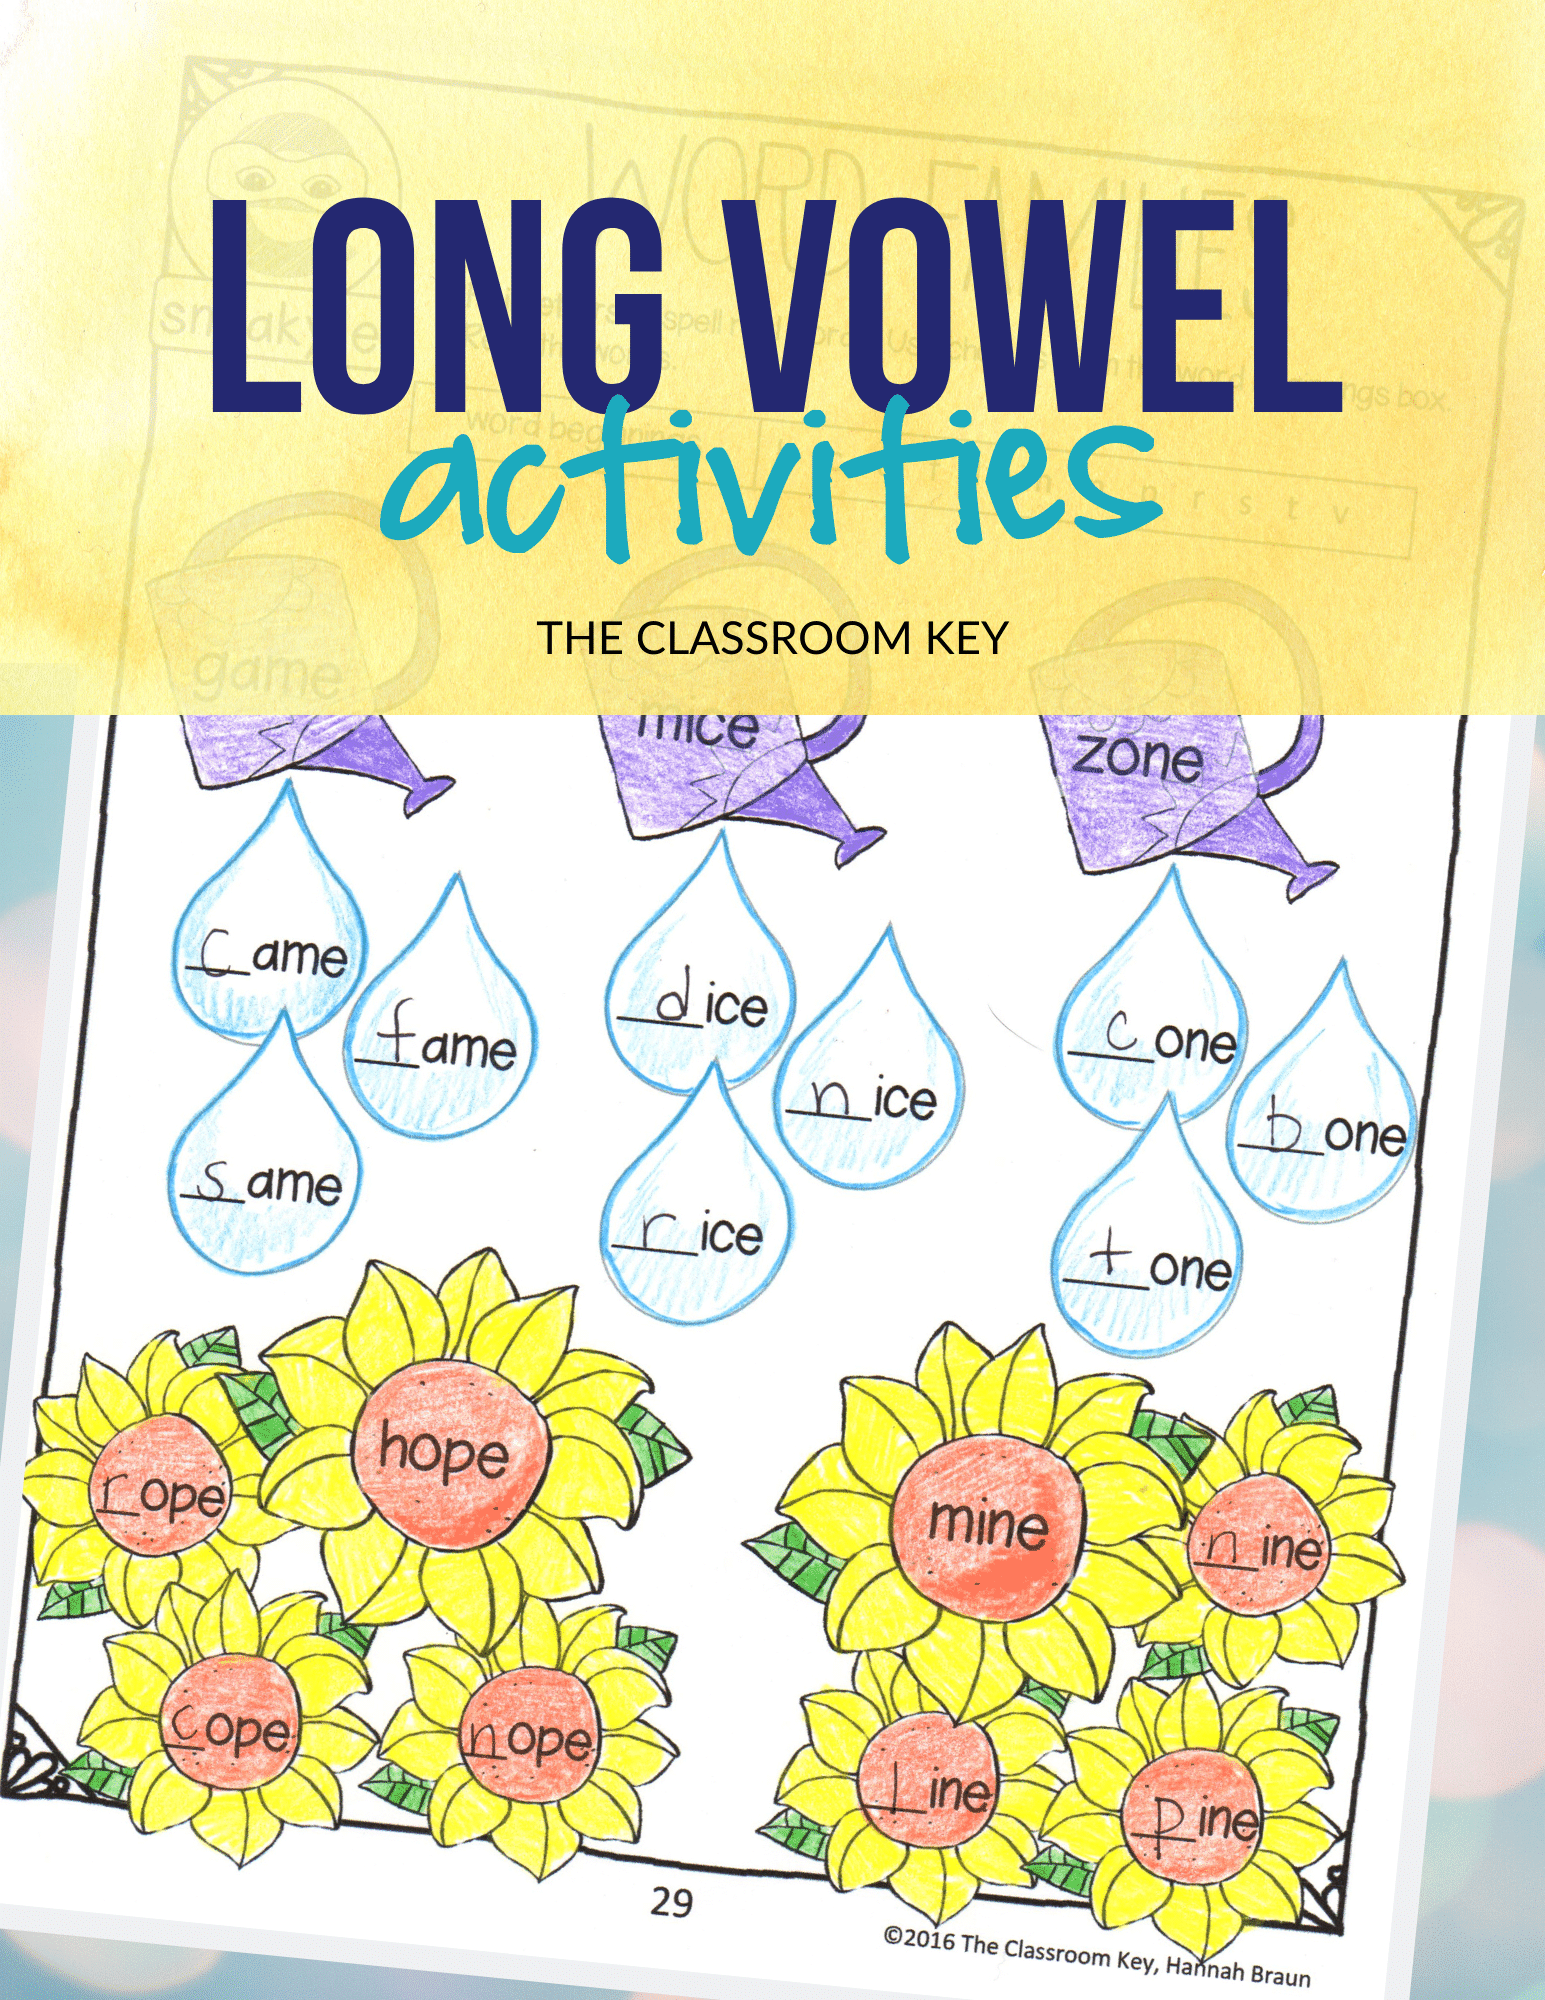 Teach long vowel (or vowel team) patterns with these no prep activities, manipulatives, posters, word sorts, and assessments. Perfect for 1st or second grade. Addresses Common Core standards RF1.3.C and RF2.3.B